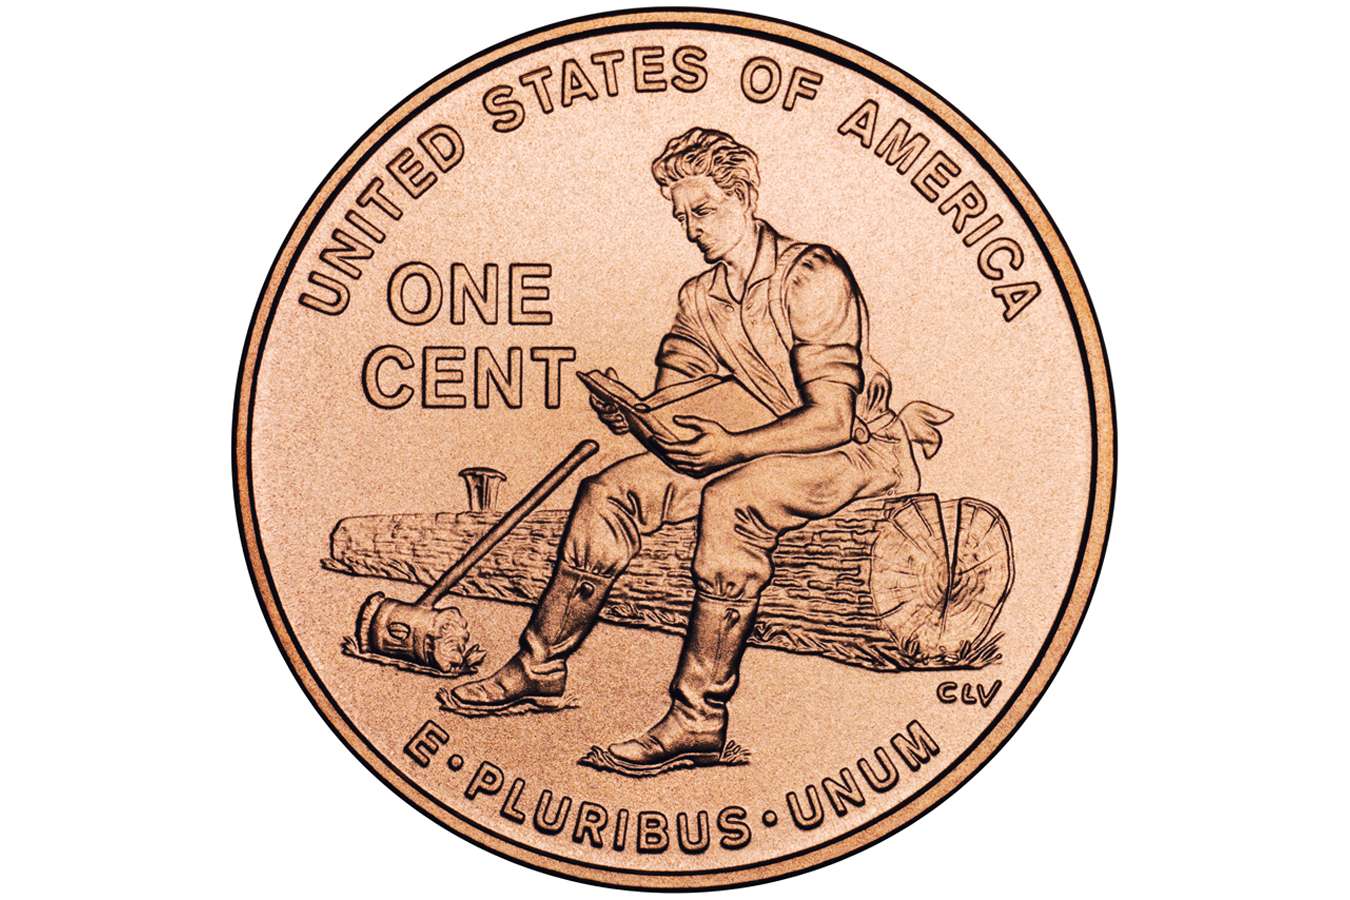 Lincoln's Formative Years in Indiana On the Reverse of the 2009 Lincoln penny